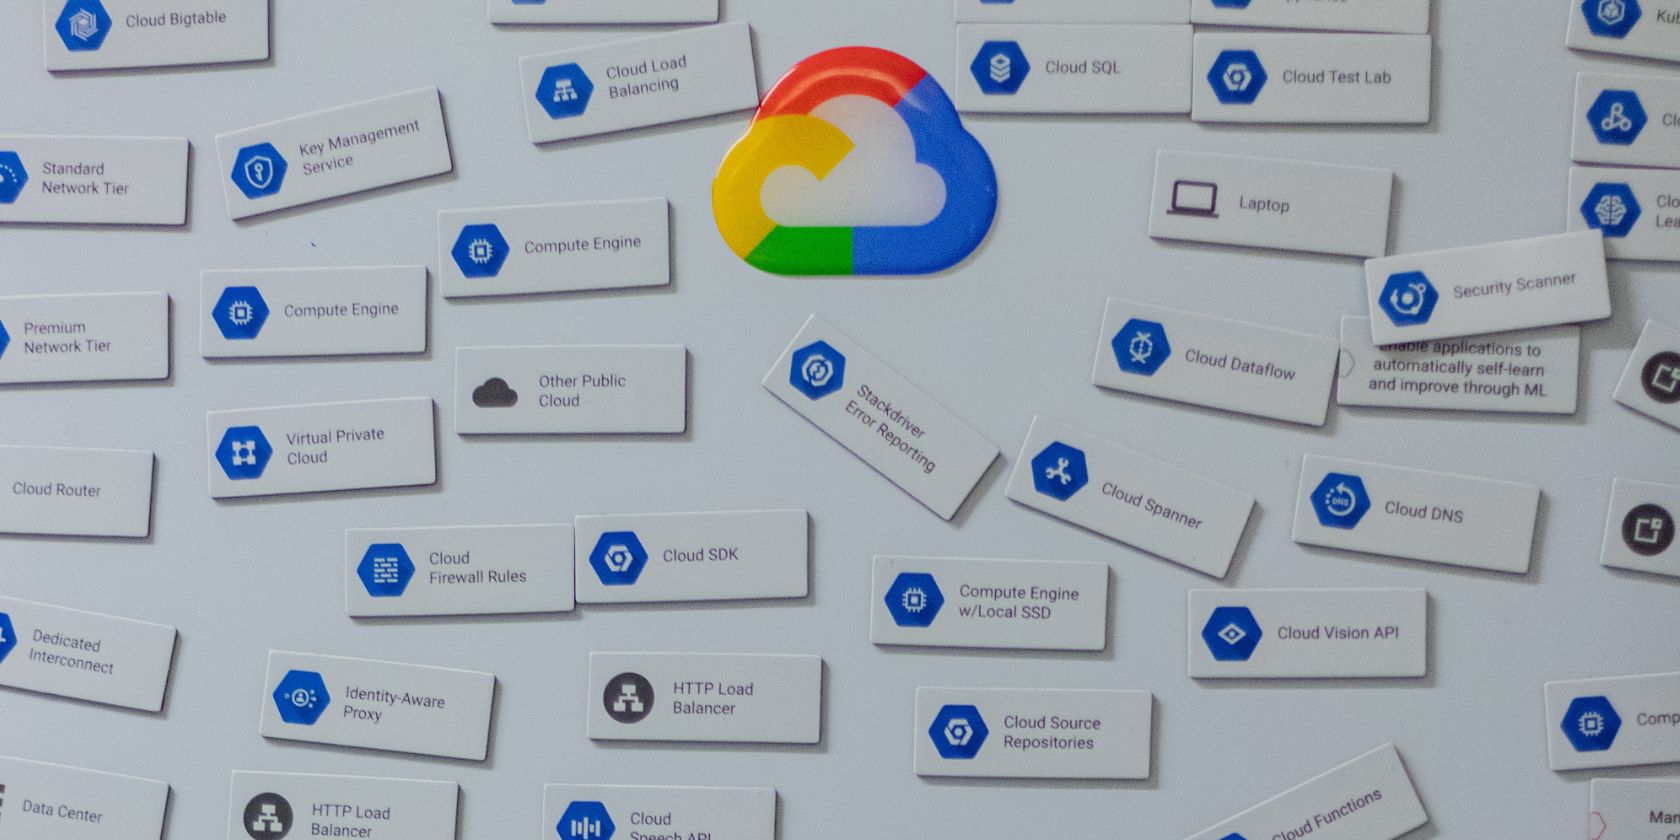 Google Cloud Tools for Experts Featured